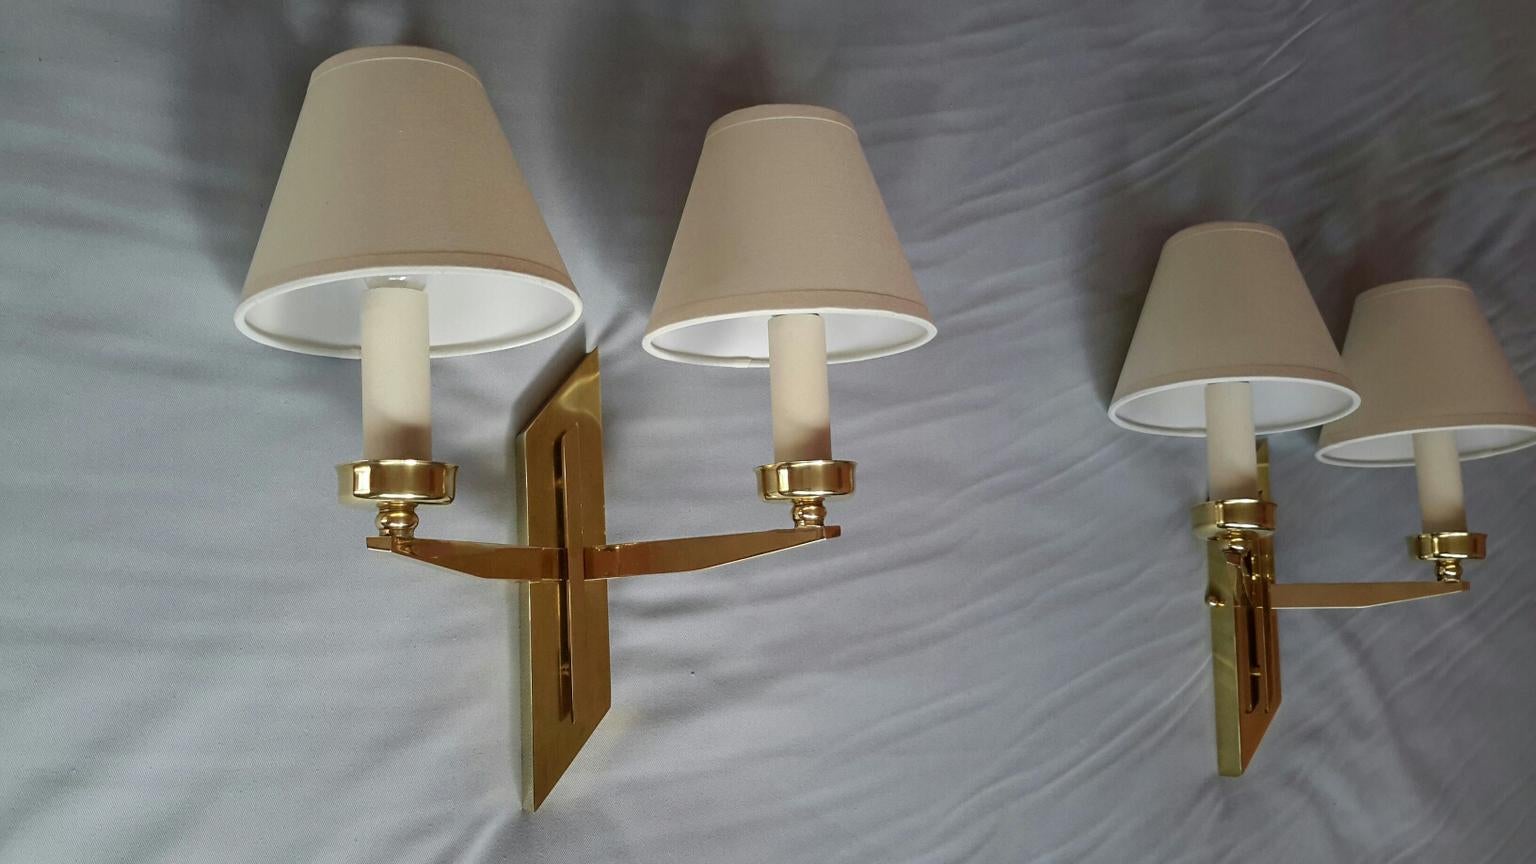 Very elegant pair of French Mid-Century Modern double arm sconces, 1950s in gilded bronze with white cotton shades by Maison LUNEL.
The sconces are in perfect condition, the new wiring fits the US standards. The White cotton shades are